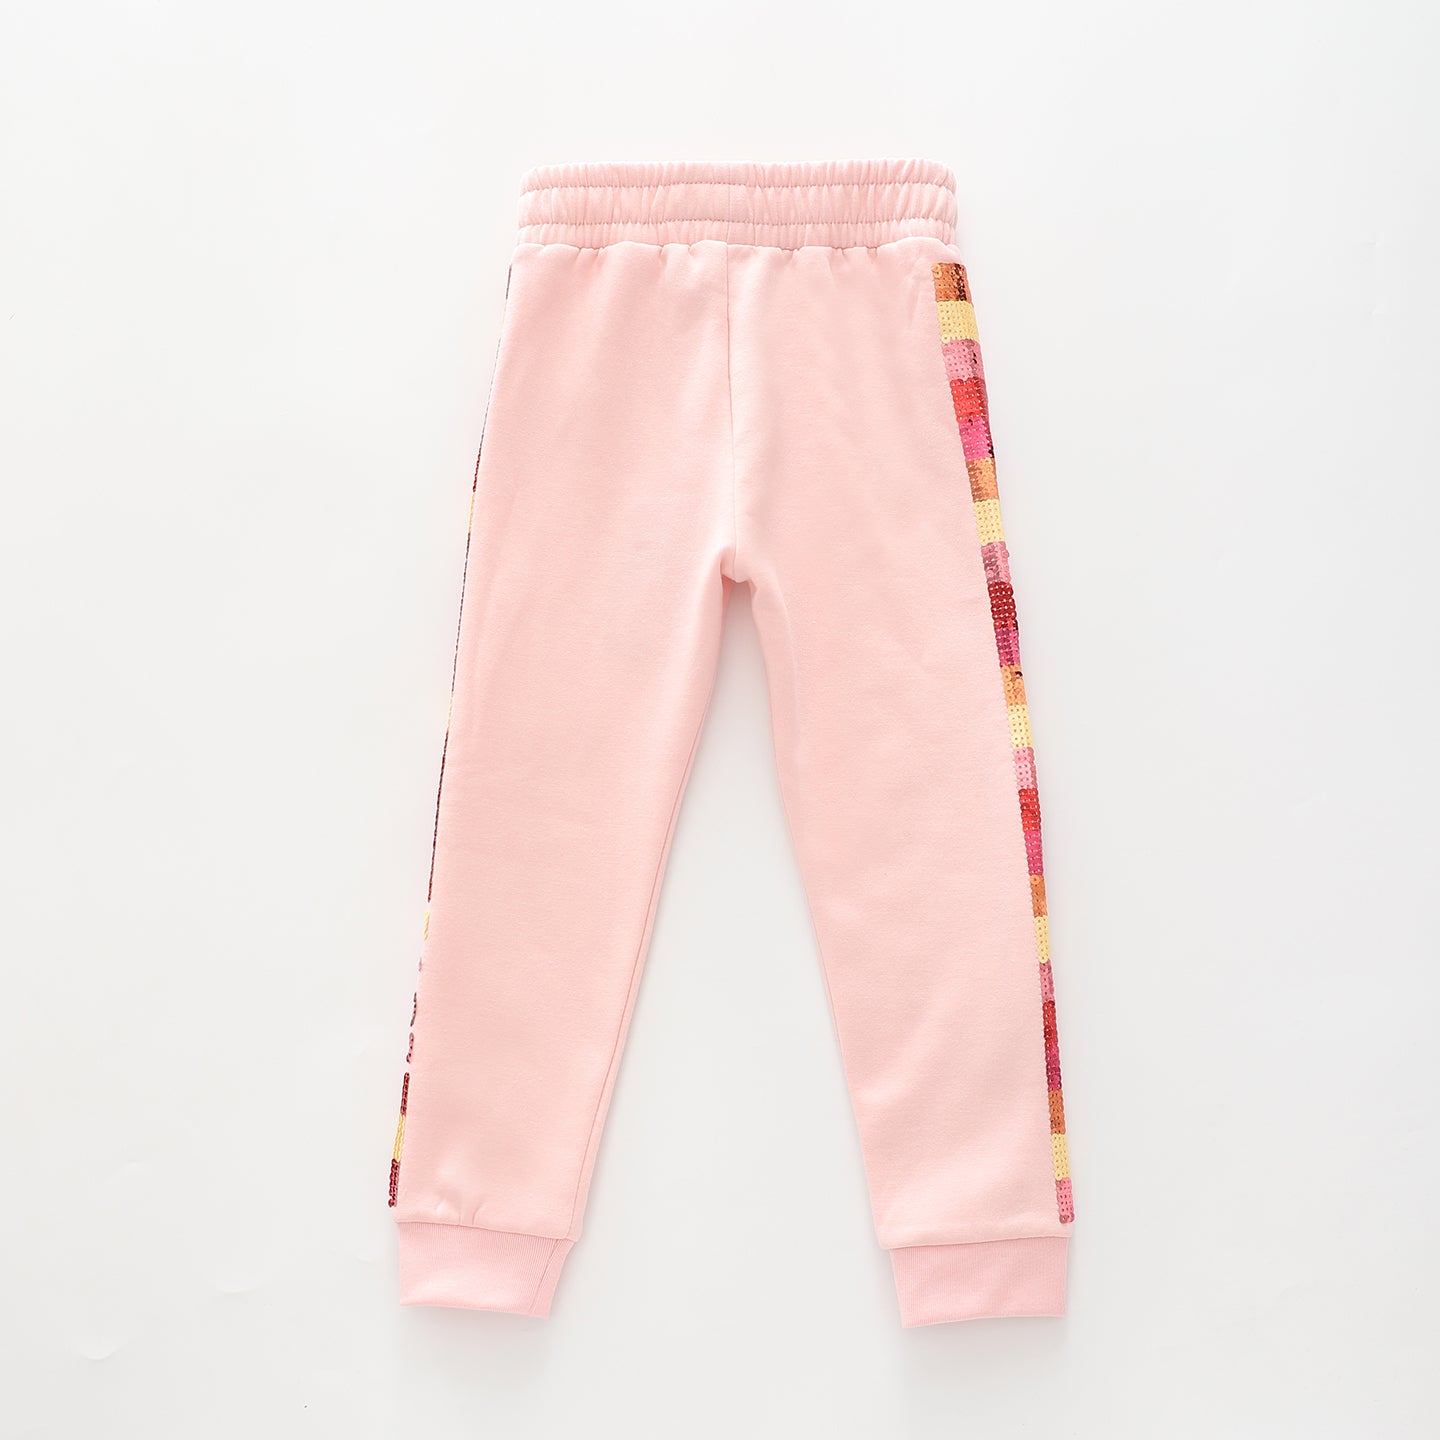 Over the Rainbow, Girls Pink Track Pants